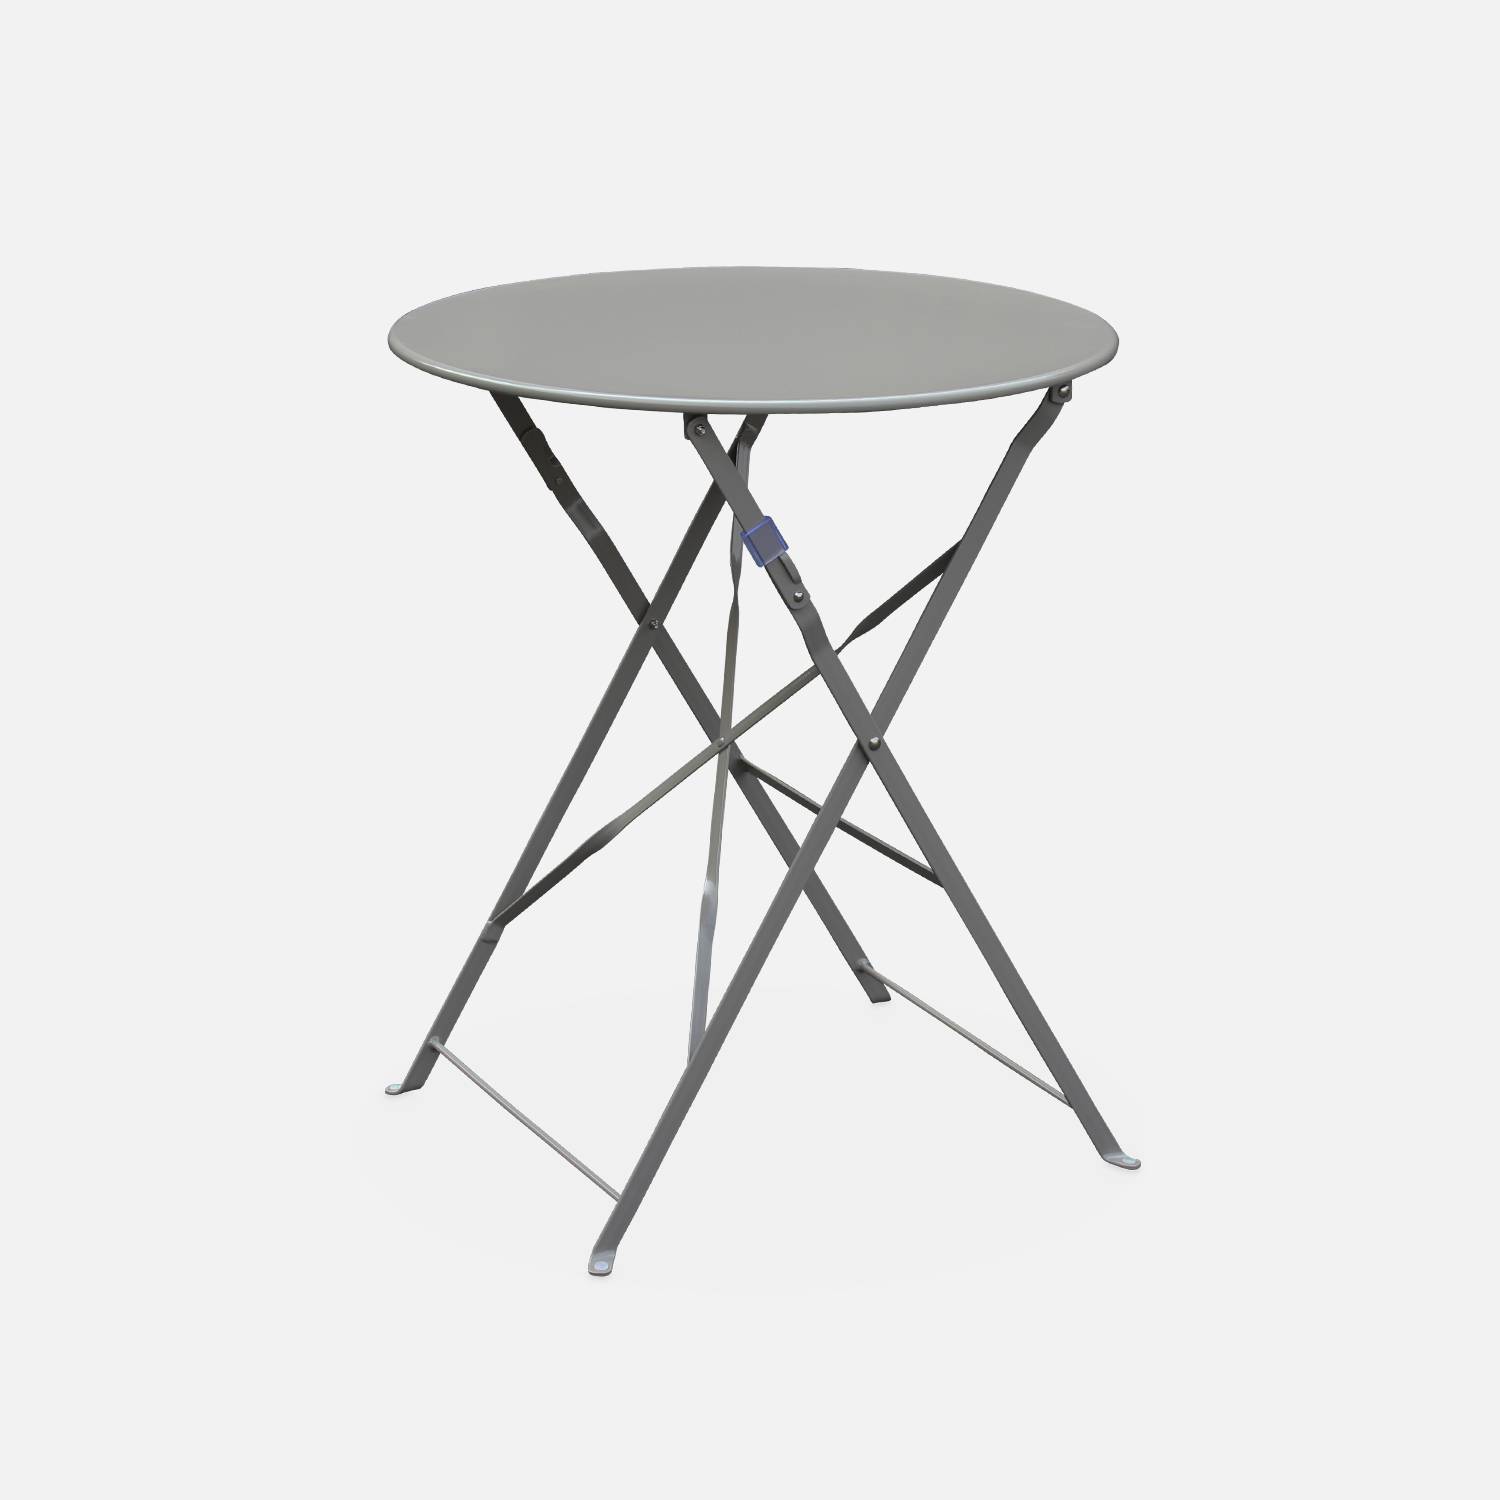 Foldable bistro garden table - Round Emilia taupe grey - Round table Ø60cm, thermo-lacquered steel | sweeek